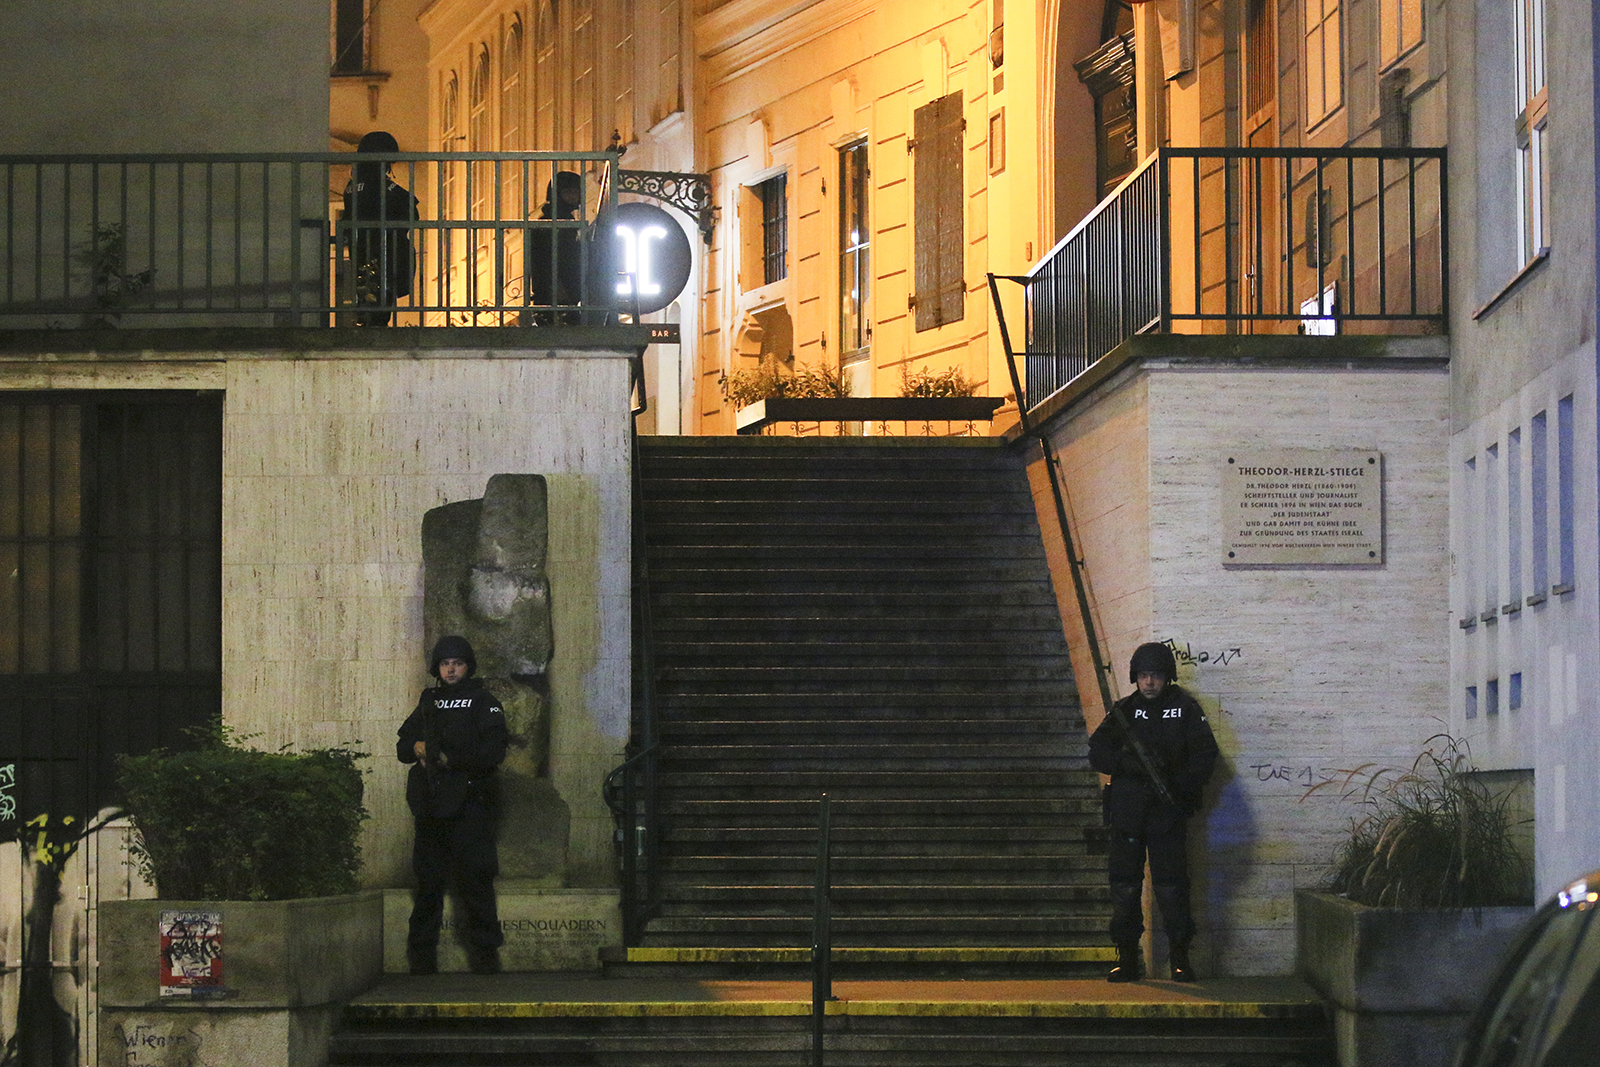 Police officers stay in position at stairs named 'Theodor Herzl Stiege' near a synagogue after Austrian police say several people have been injured and officers are out in force following gunfire in Vienna on Monday, November 2.